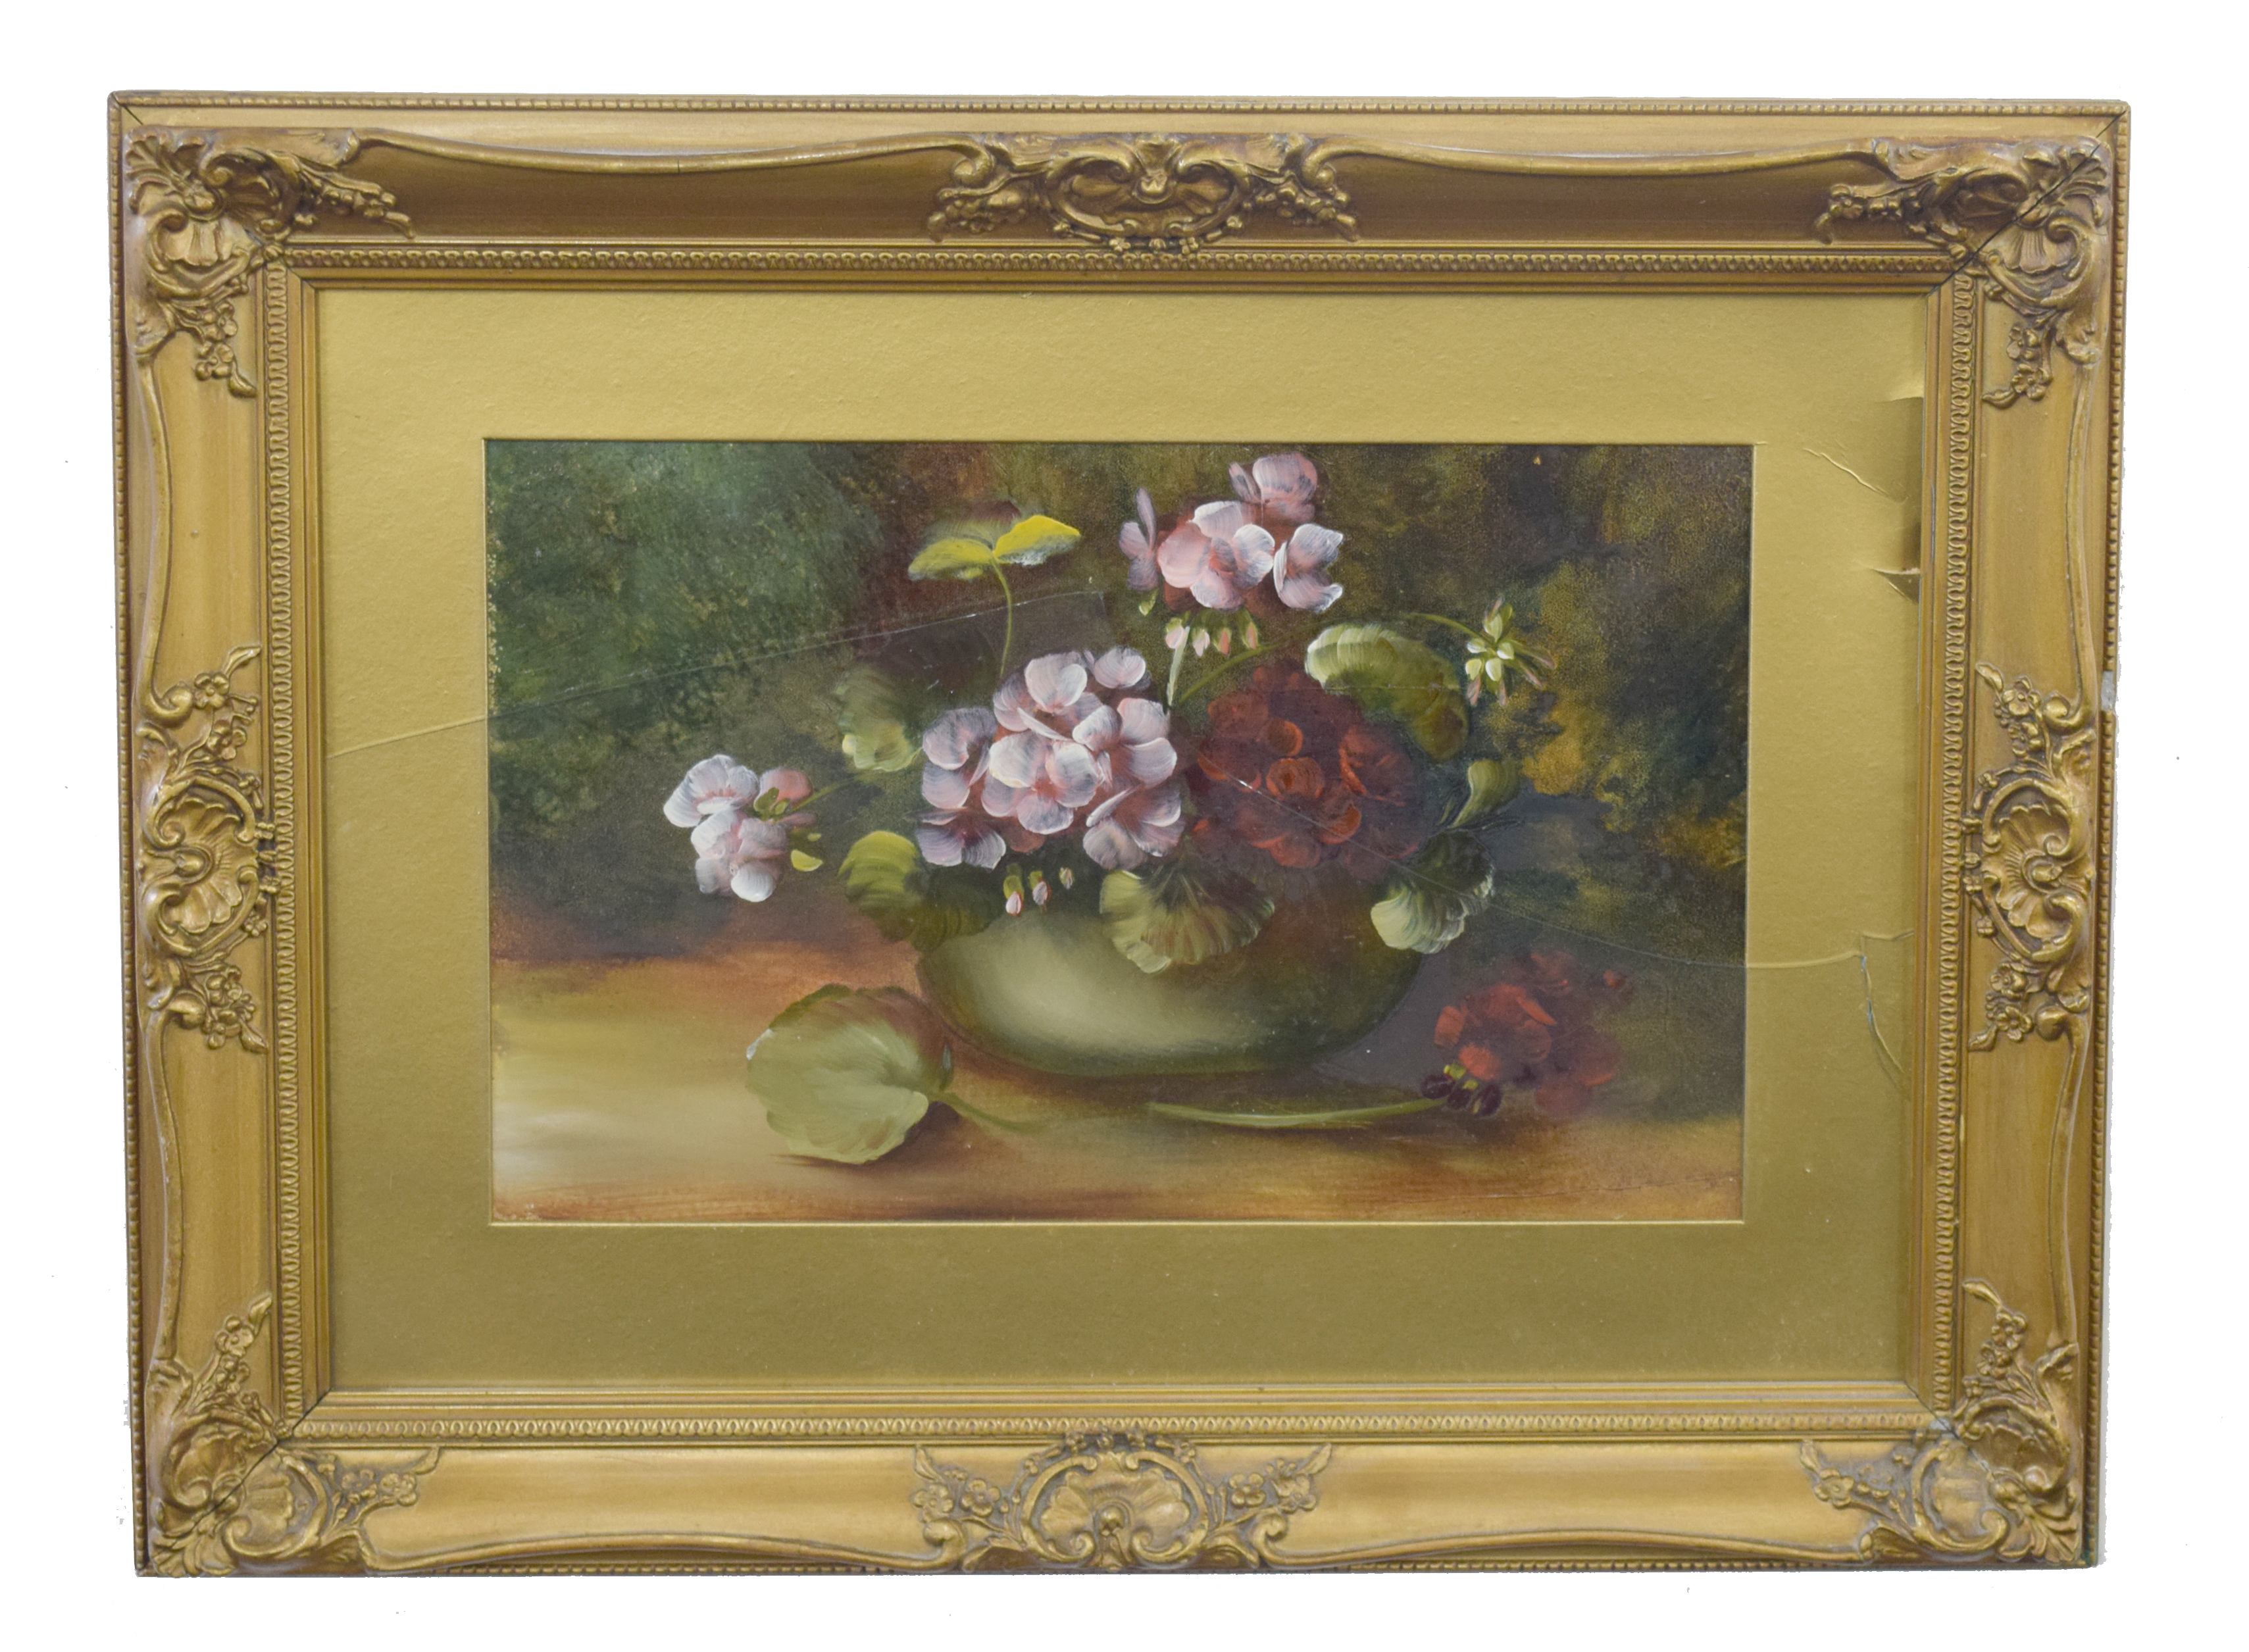 British, 20th century, pair of Still Lifes, Summer Flowers in full bloom, oil on canvas, - Image 2 of 2